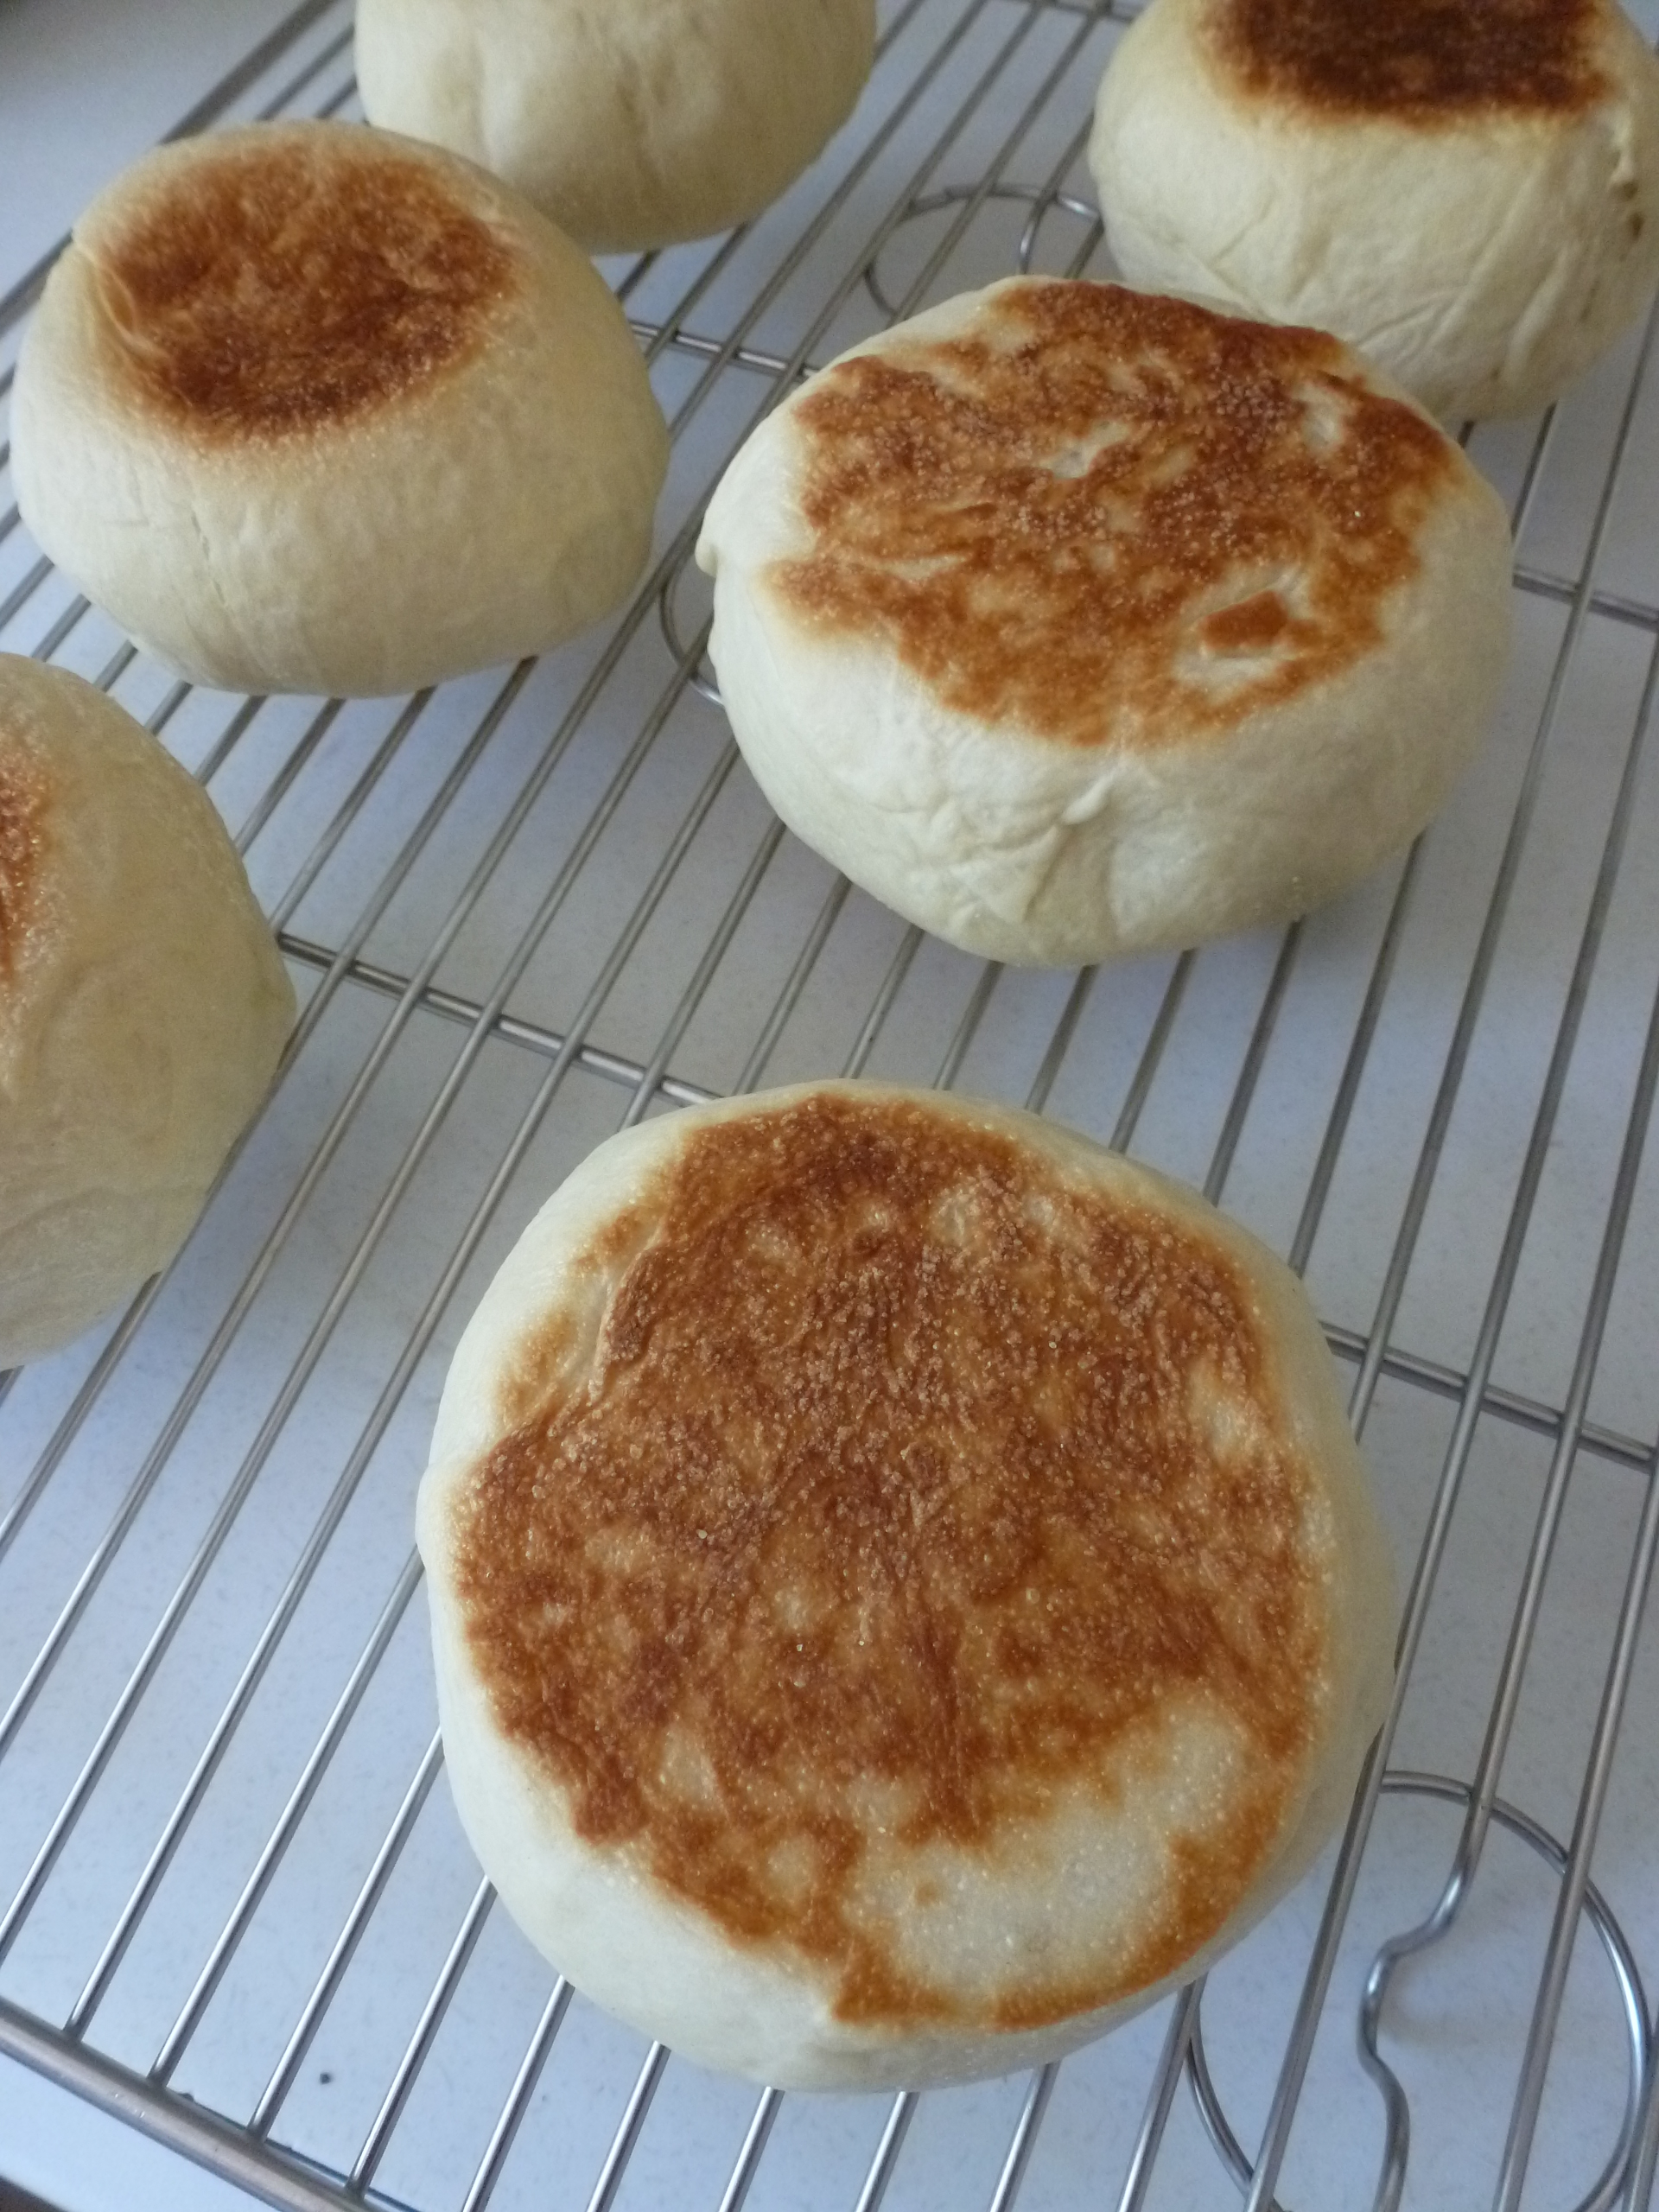 Cooling the English muffins